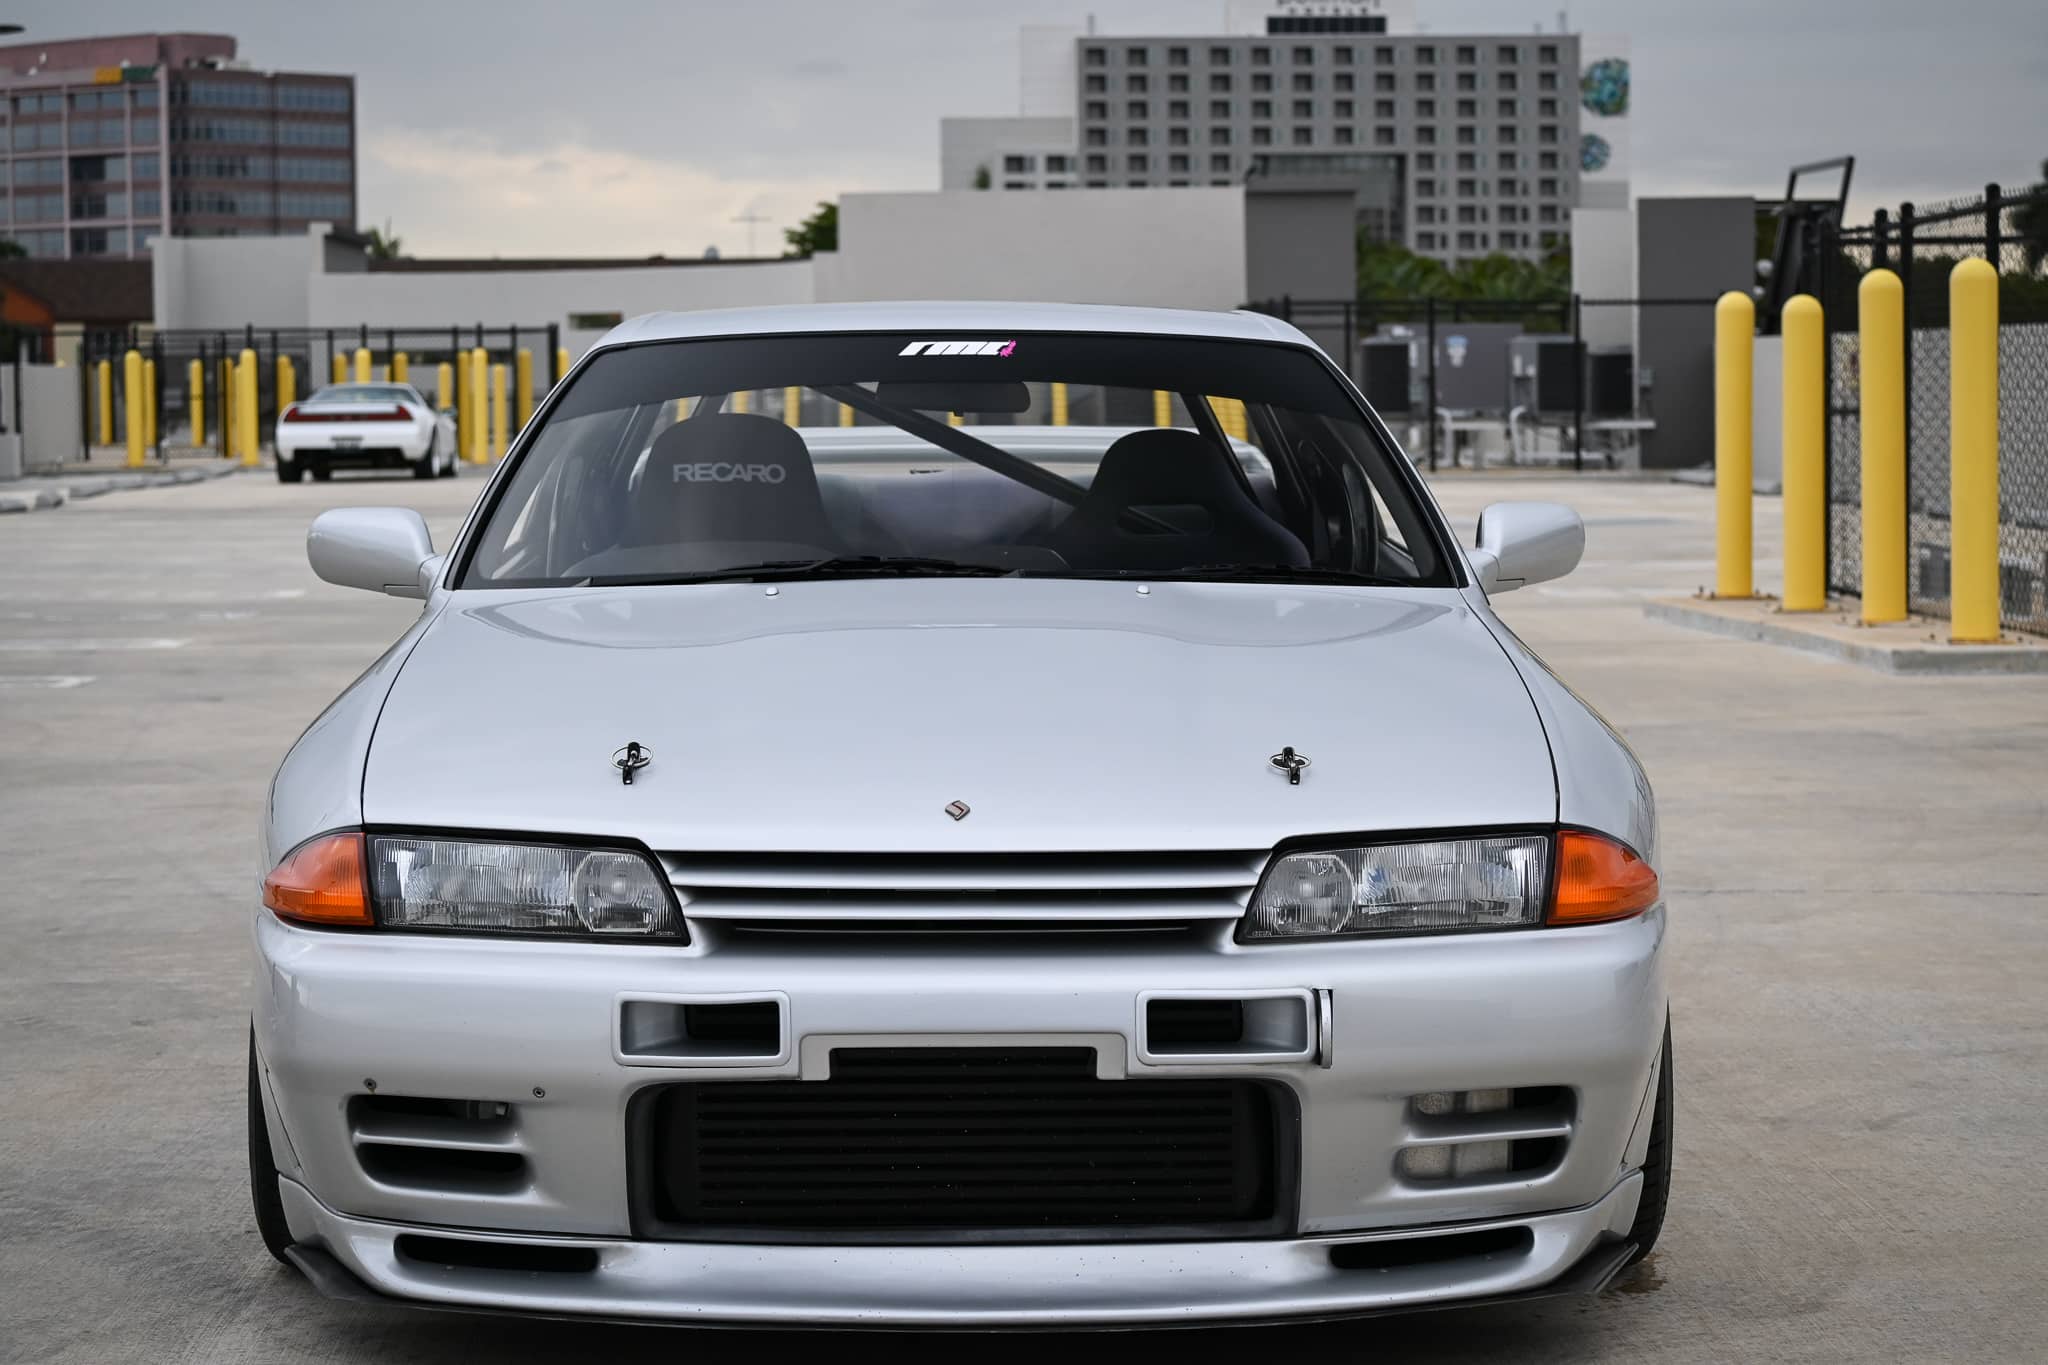 1994 R32 Skyline GTR Built by Bee*R Bee*R built Demo car | 2.8L V-Cam | 678awhp | Sequential Gearbox | Brembo BBK | Fully Serviced | Holinger | Tomei | A\C | Turn Key